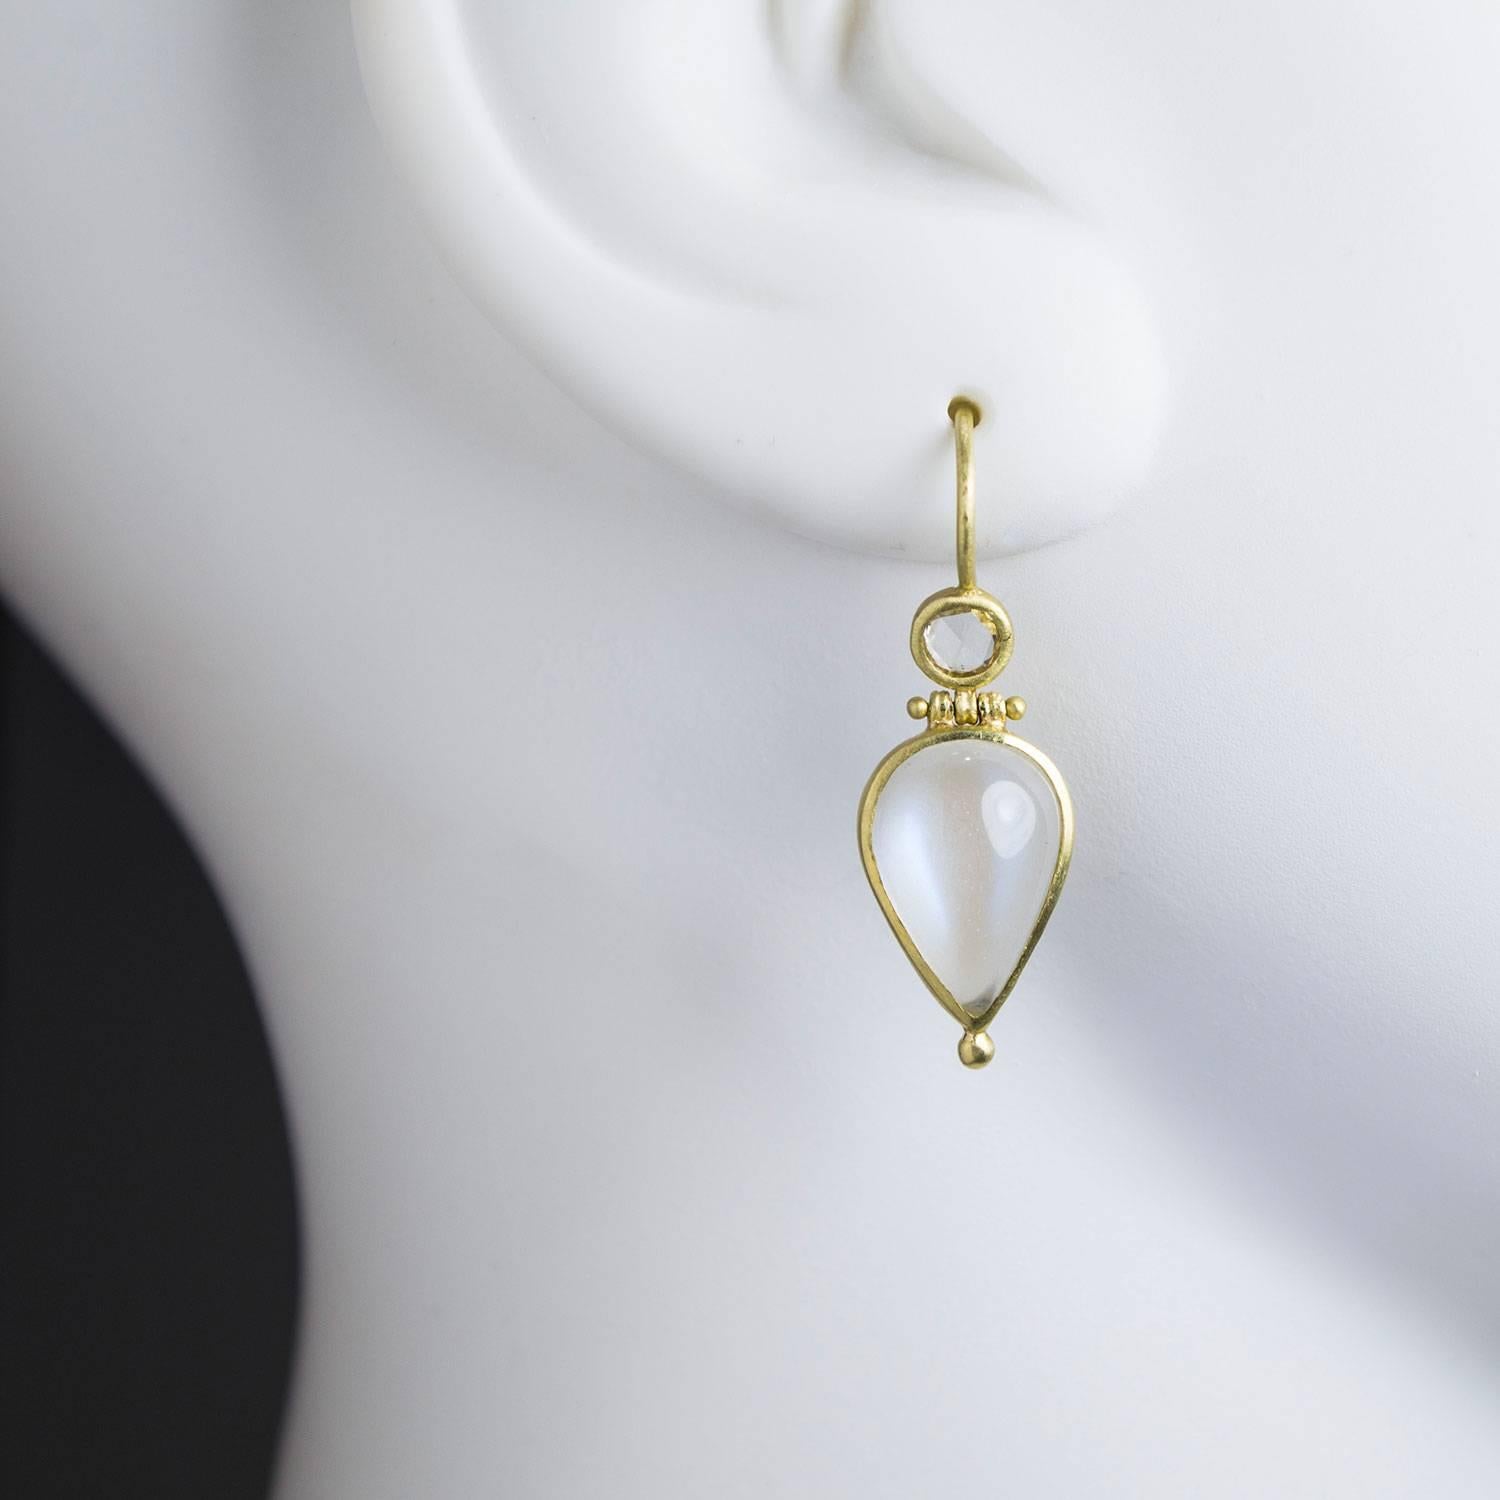 White rose cut diamonds and tear drop moonstones combine beautifully in these 18k green* gold handmade earrings.  The hinge movement enhances the sparkle of diamonds and play of light in the African moonstone drops.  Feminine and bold, the nuances